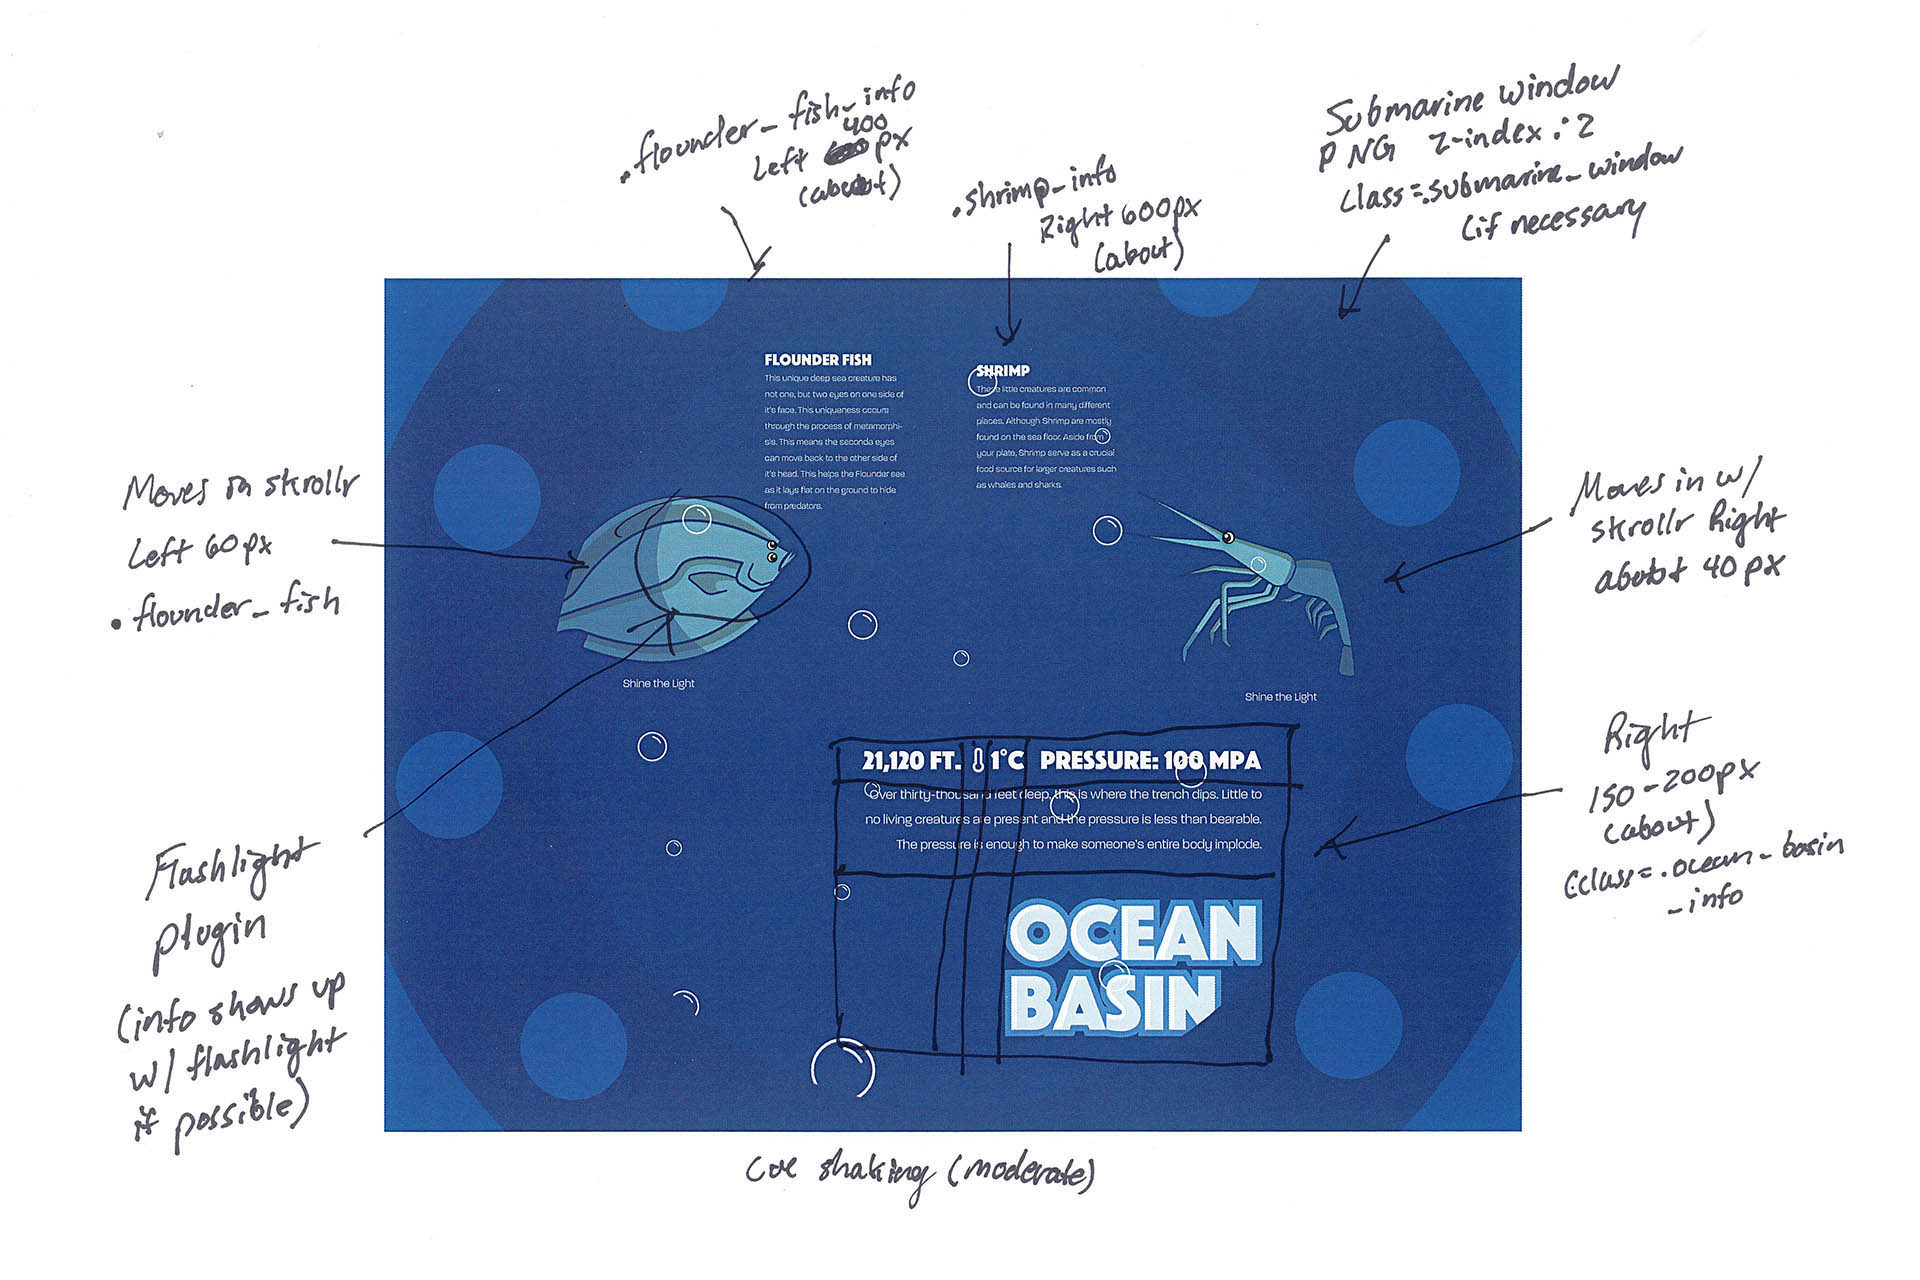 Planning the Ocean Basin page